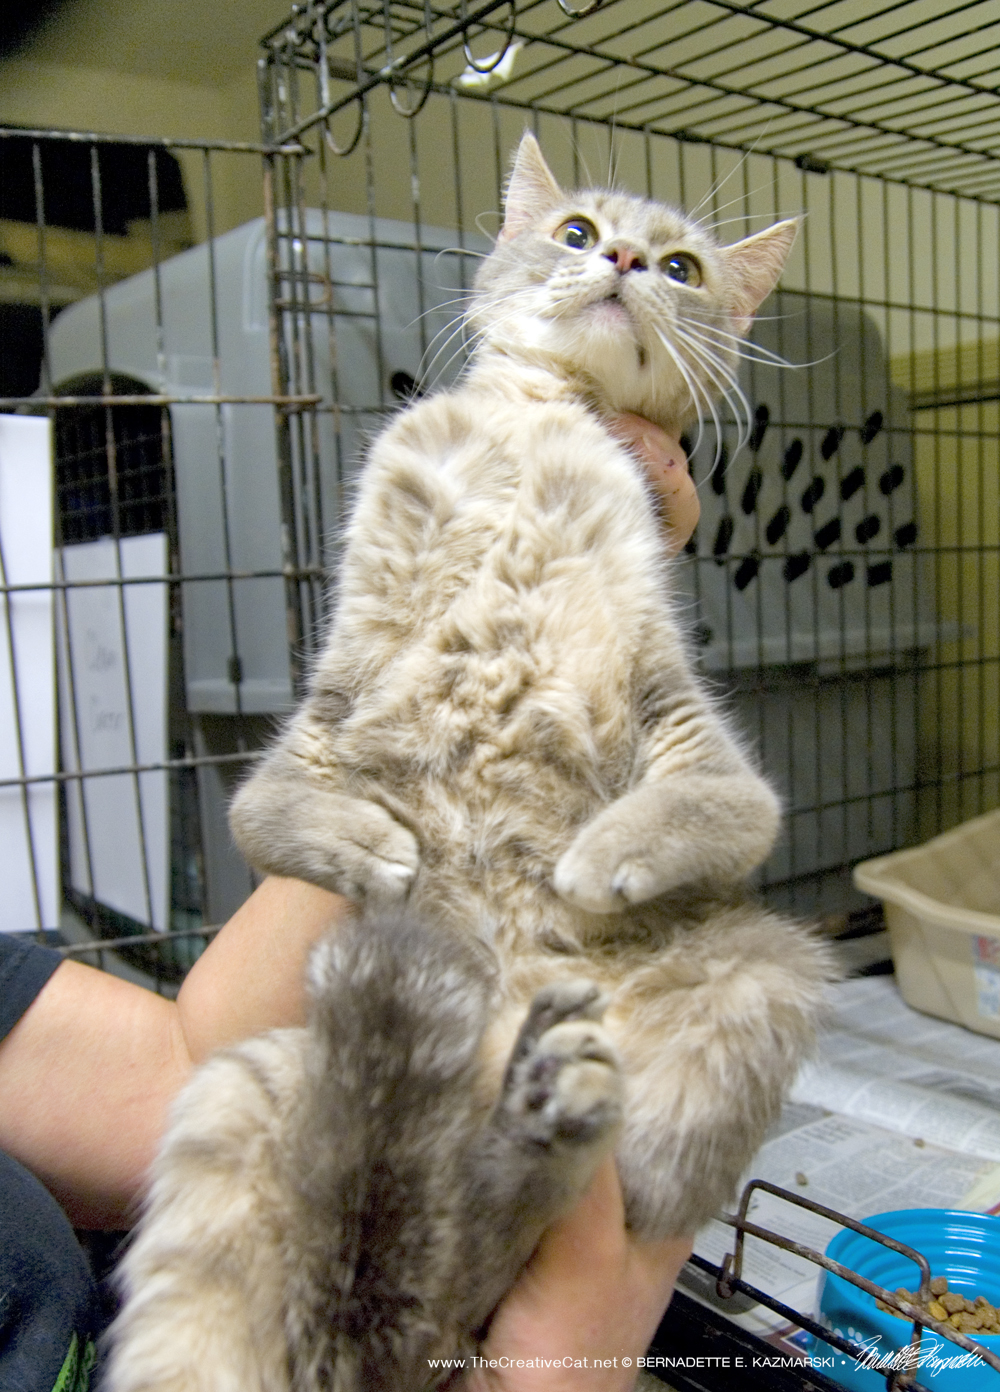 The radial hypoplasia kitty's front legs and hind foot.